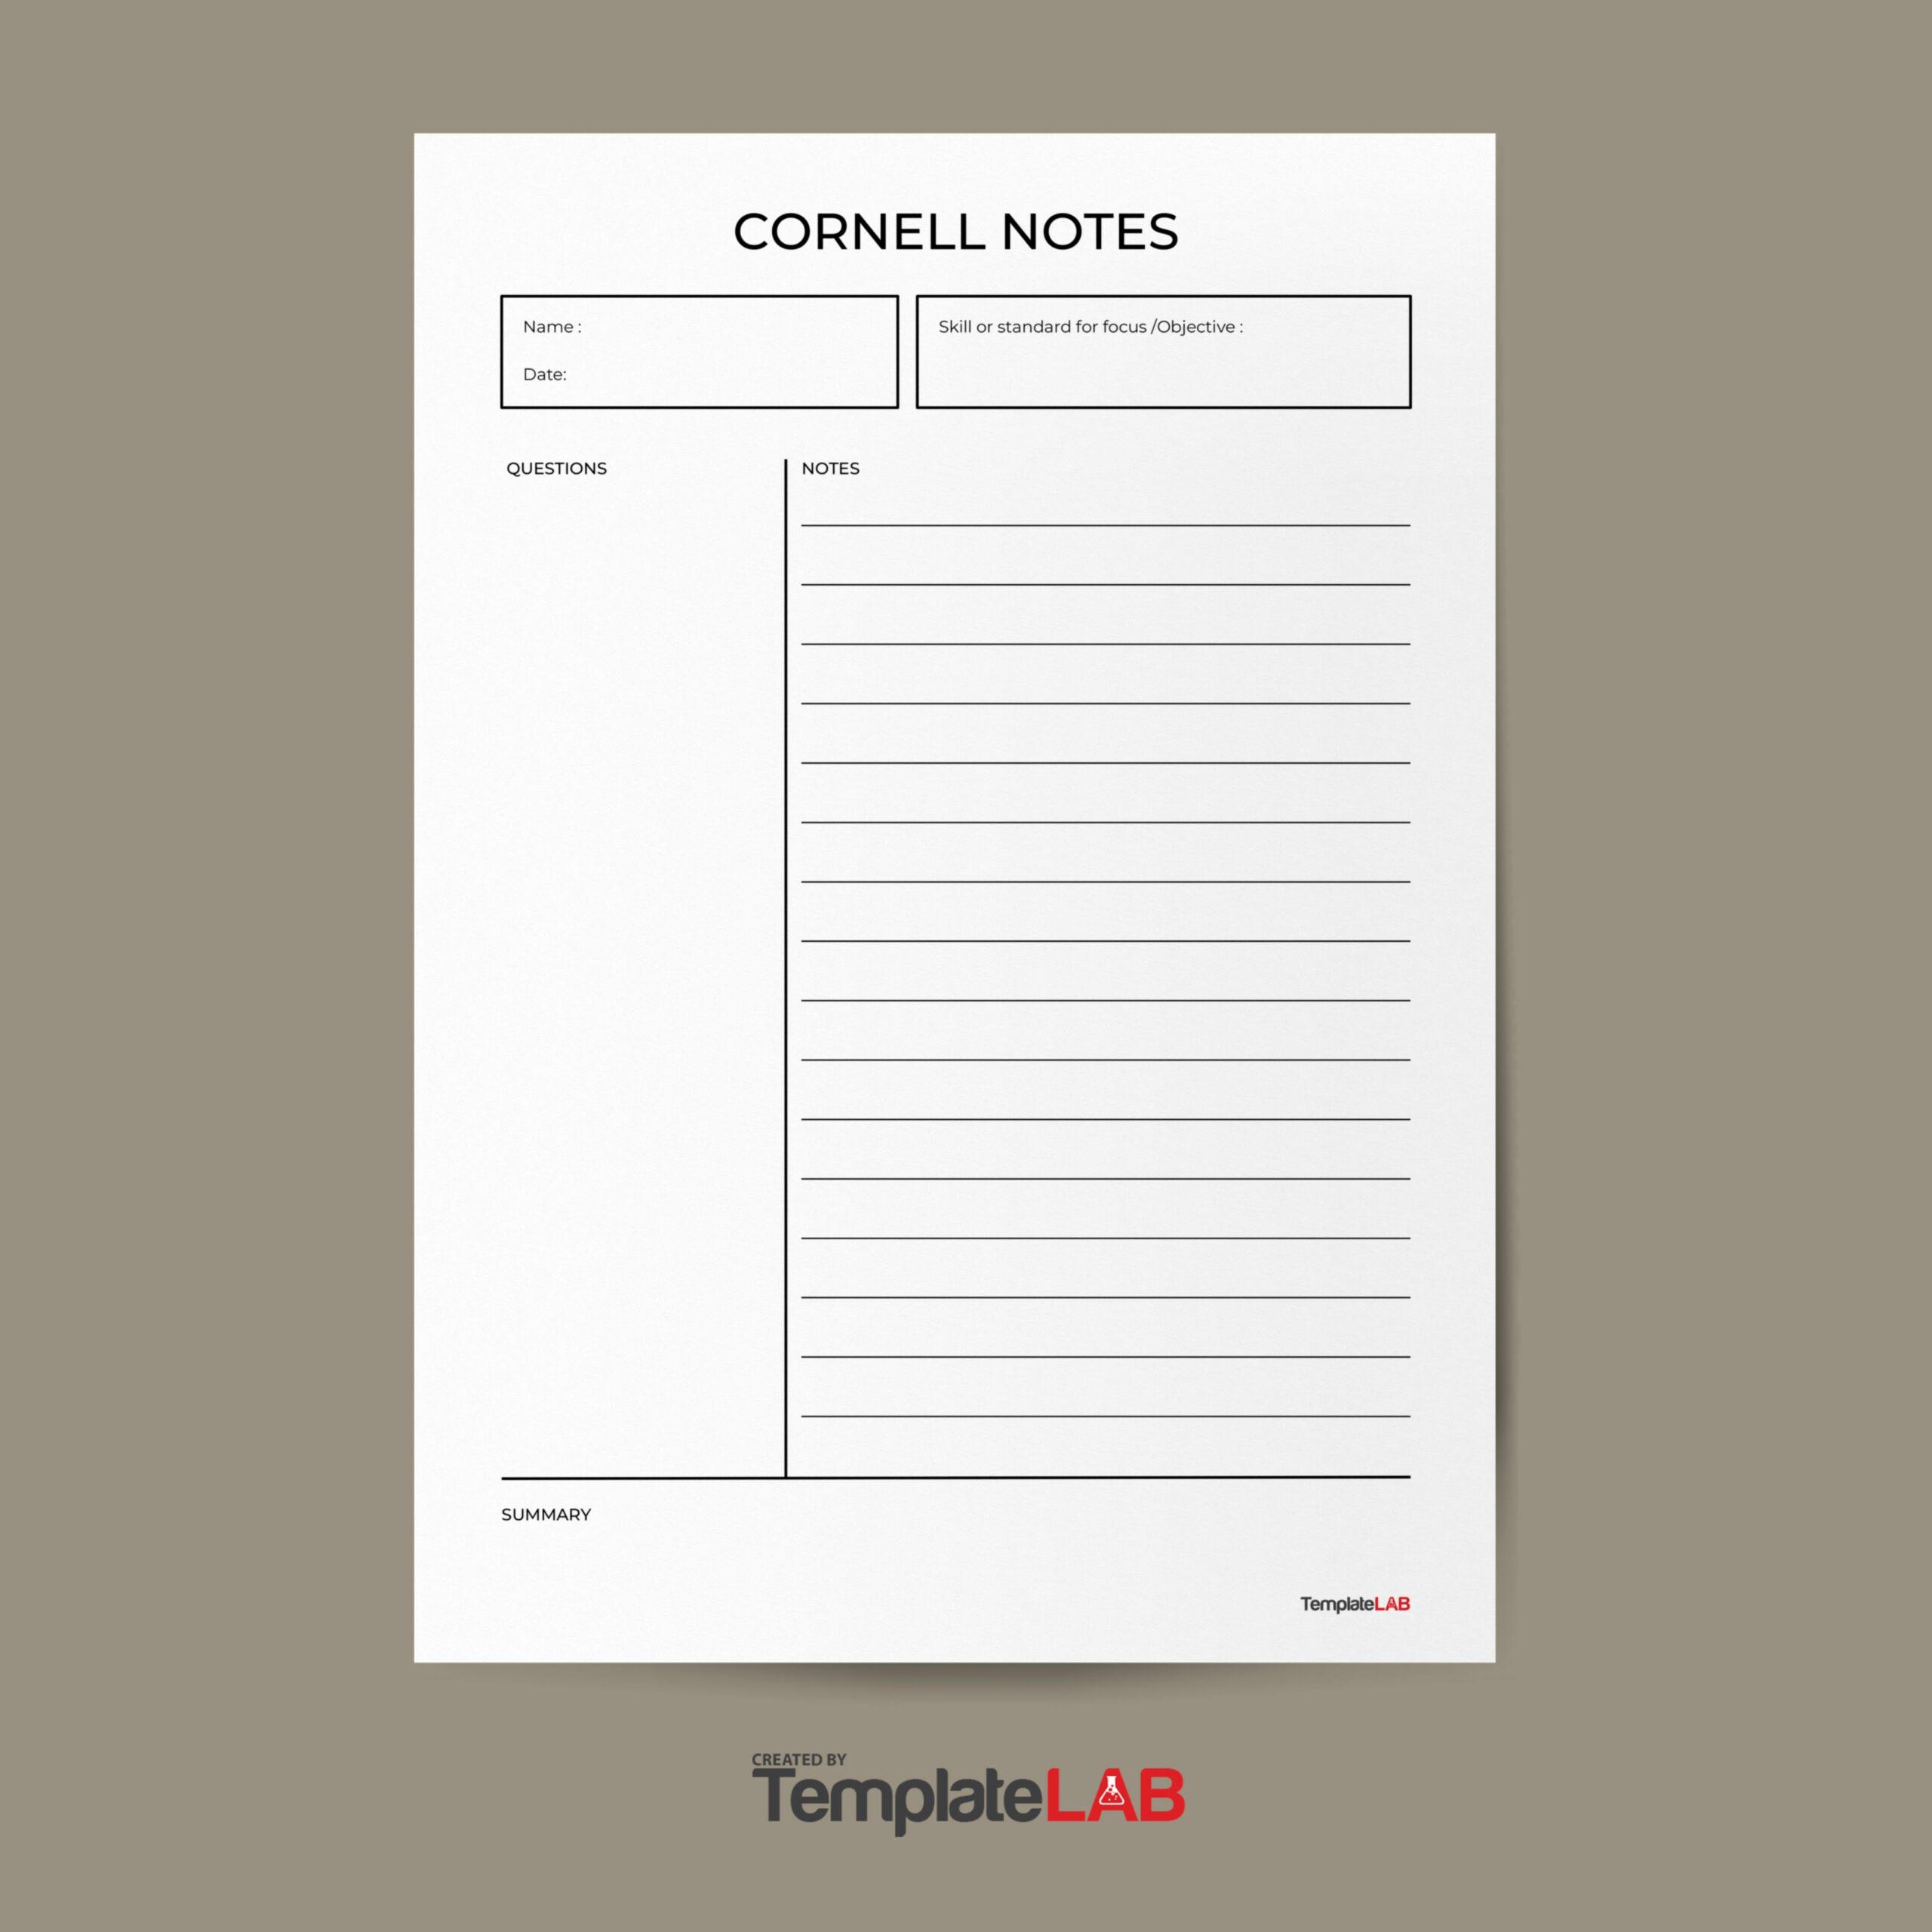 Free Cornell Notes Template V3